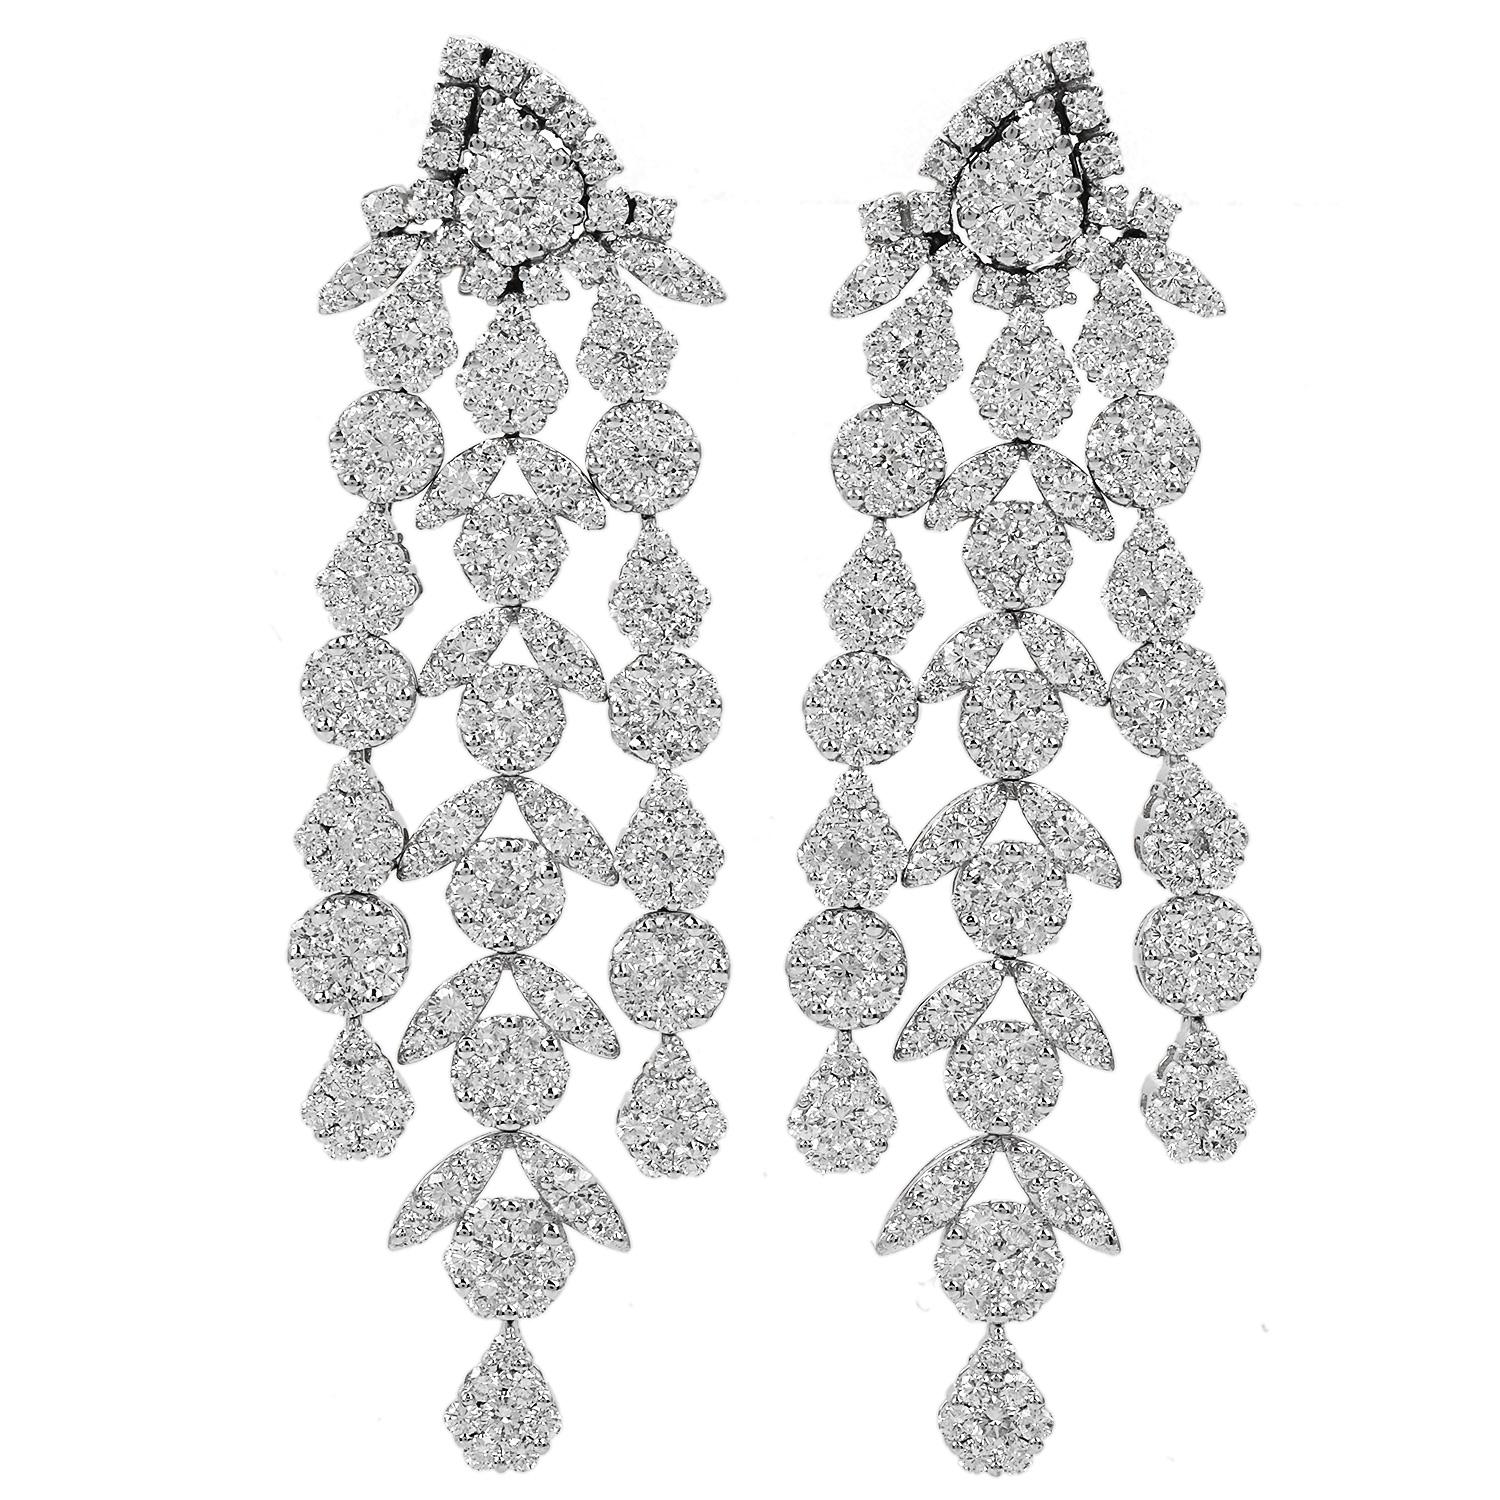 These Floral Link Dangle Drop Earrings are a remarkable pair of earrings that epitomize luxury.

They feature a dazzling display of diamonds set in 18K white gold, creating a captivating, elongated, and glamorous look.

The focal point of these